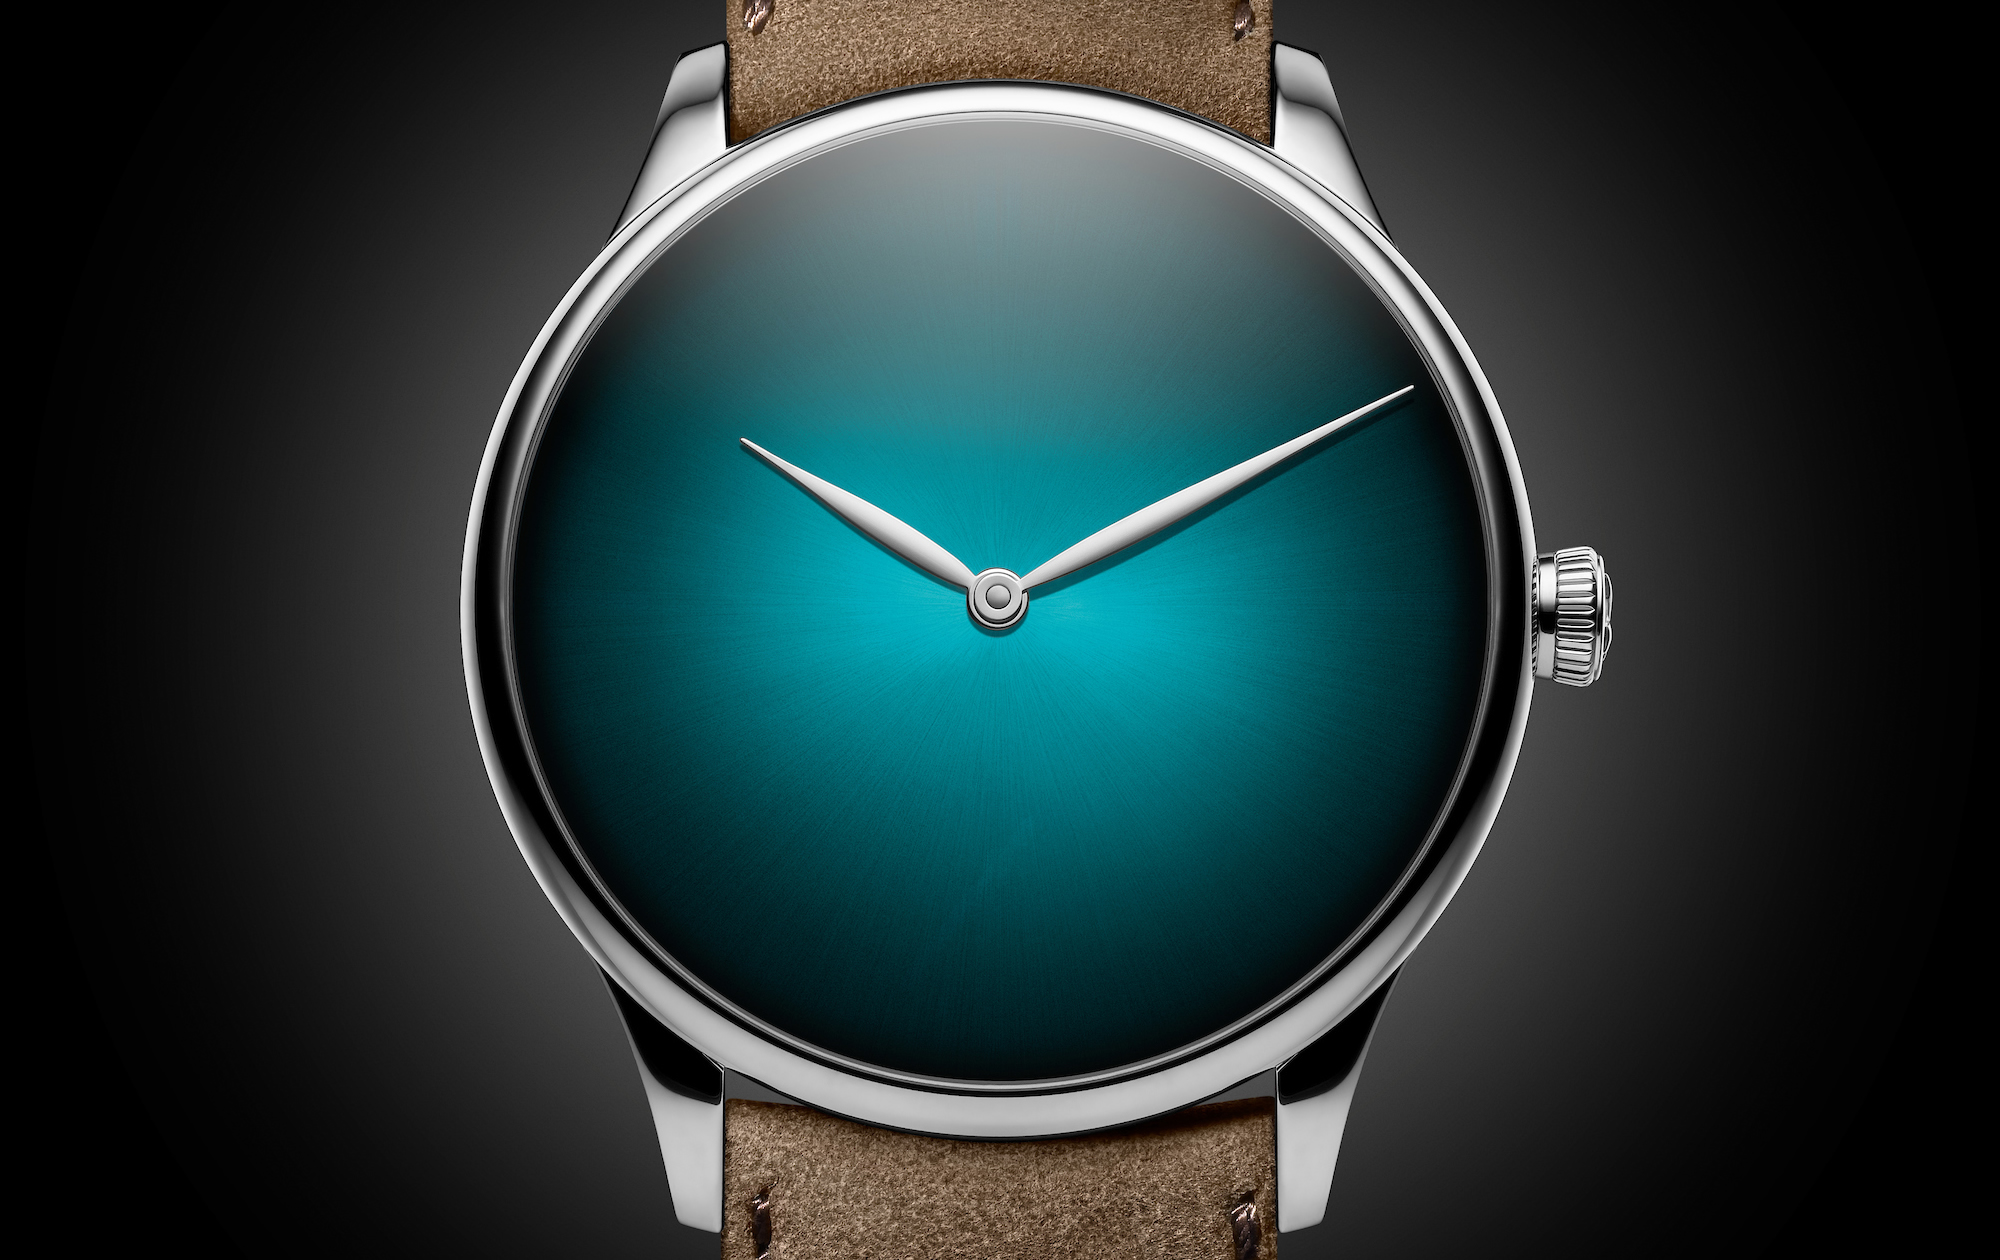 H. MOSER & CIE.: EXPERIENCE THE BLUE LAGOON